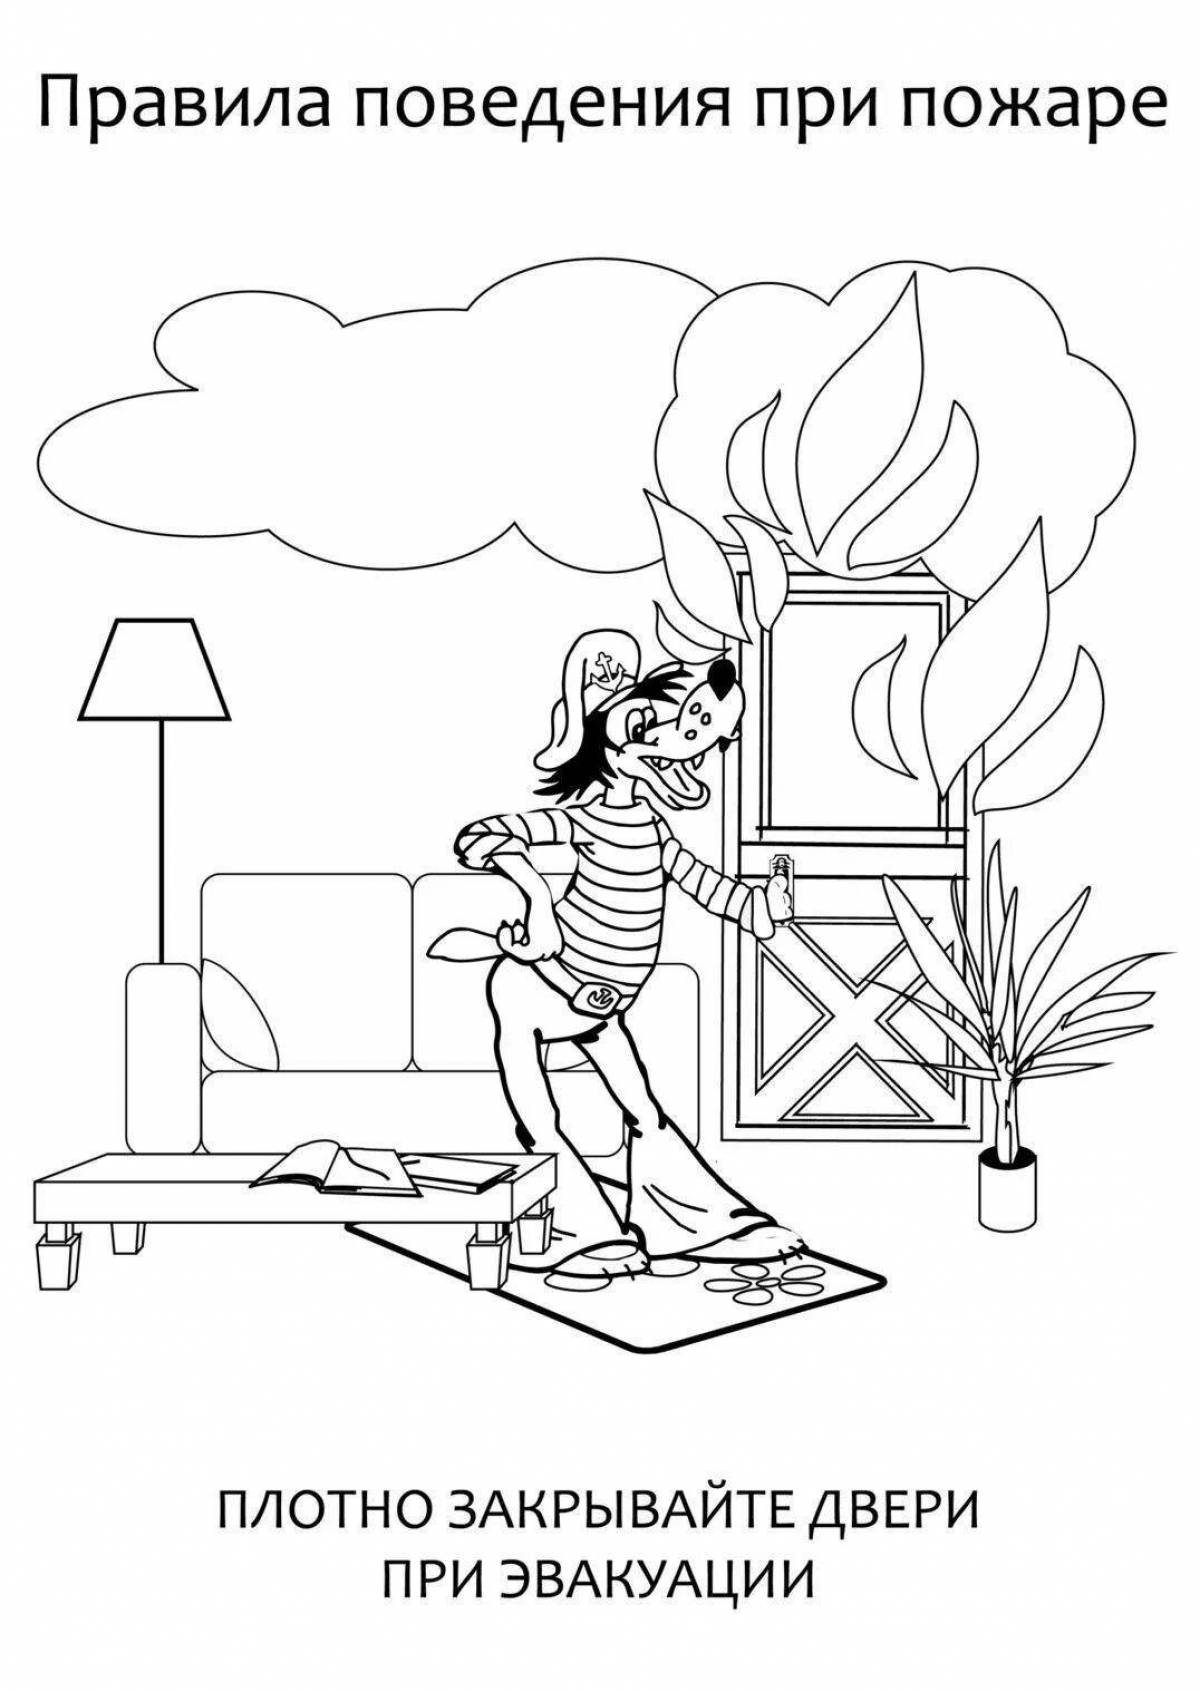 Children's fire safety guide #3